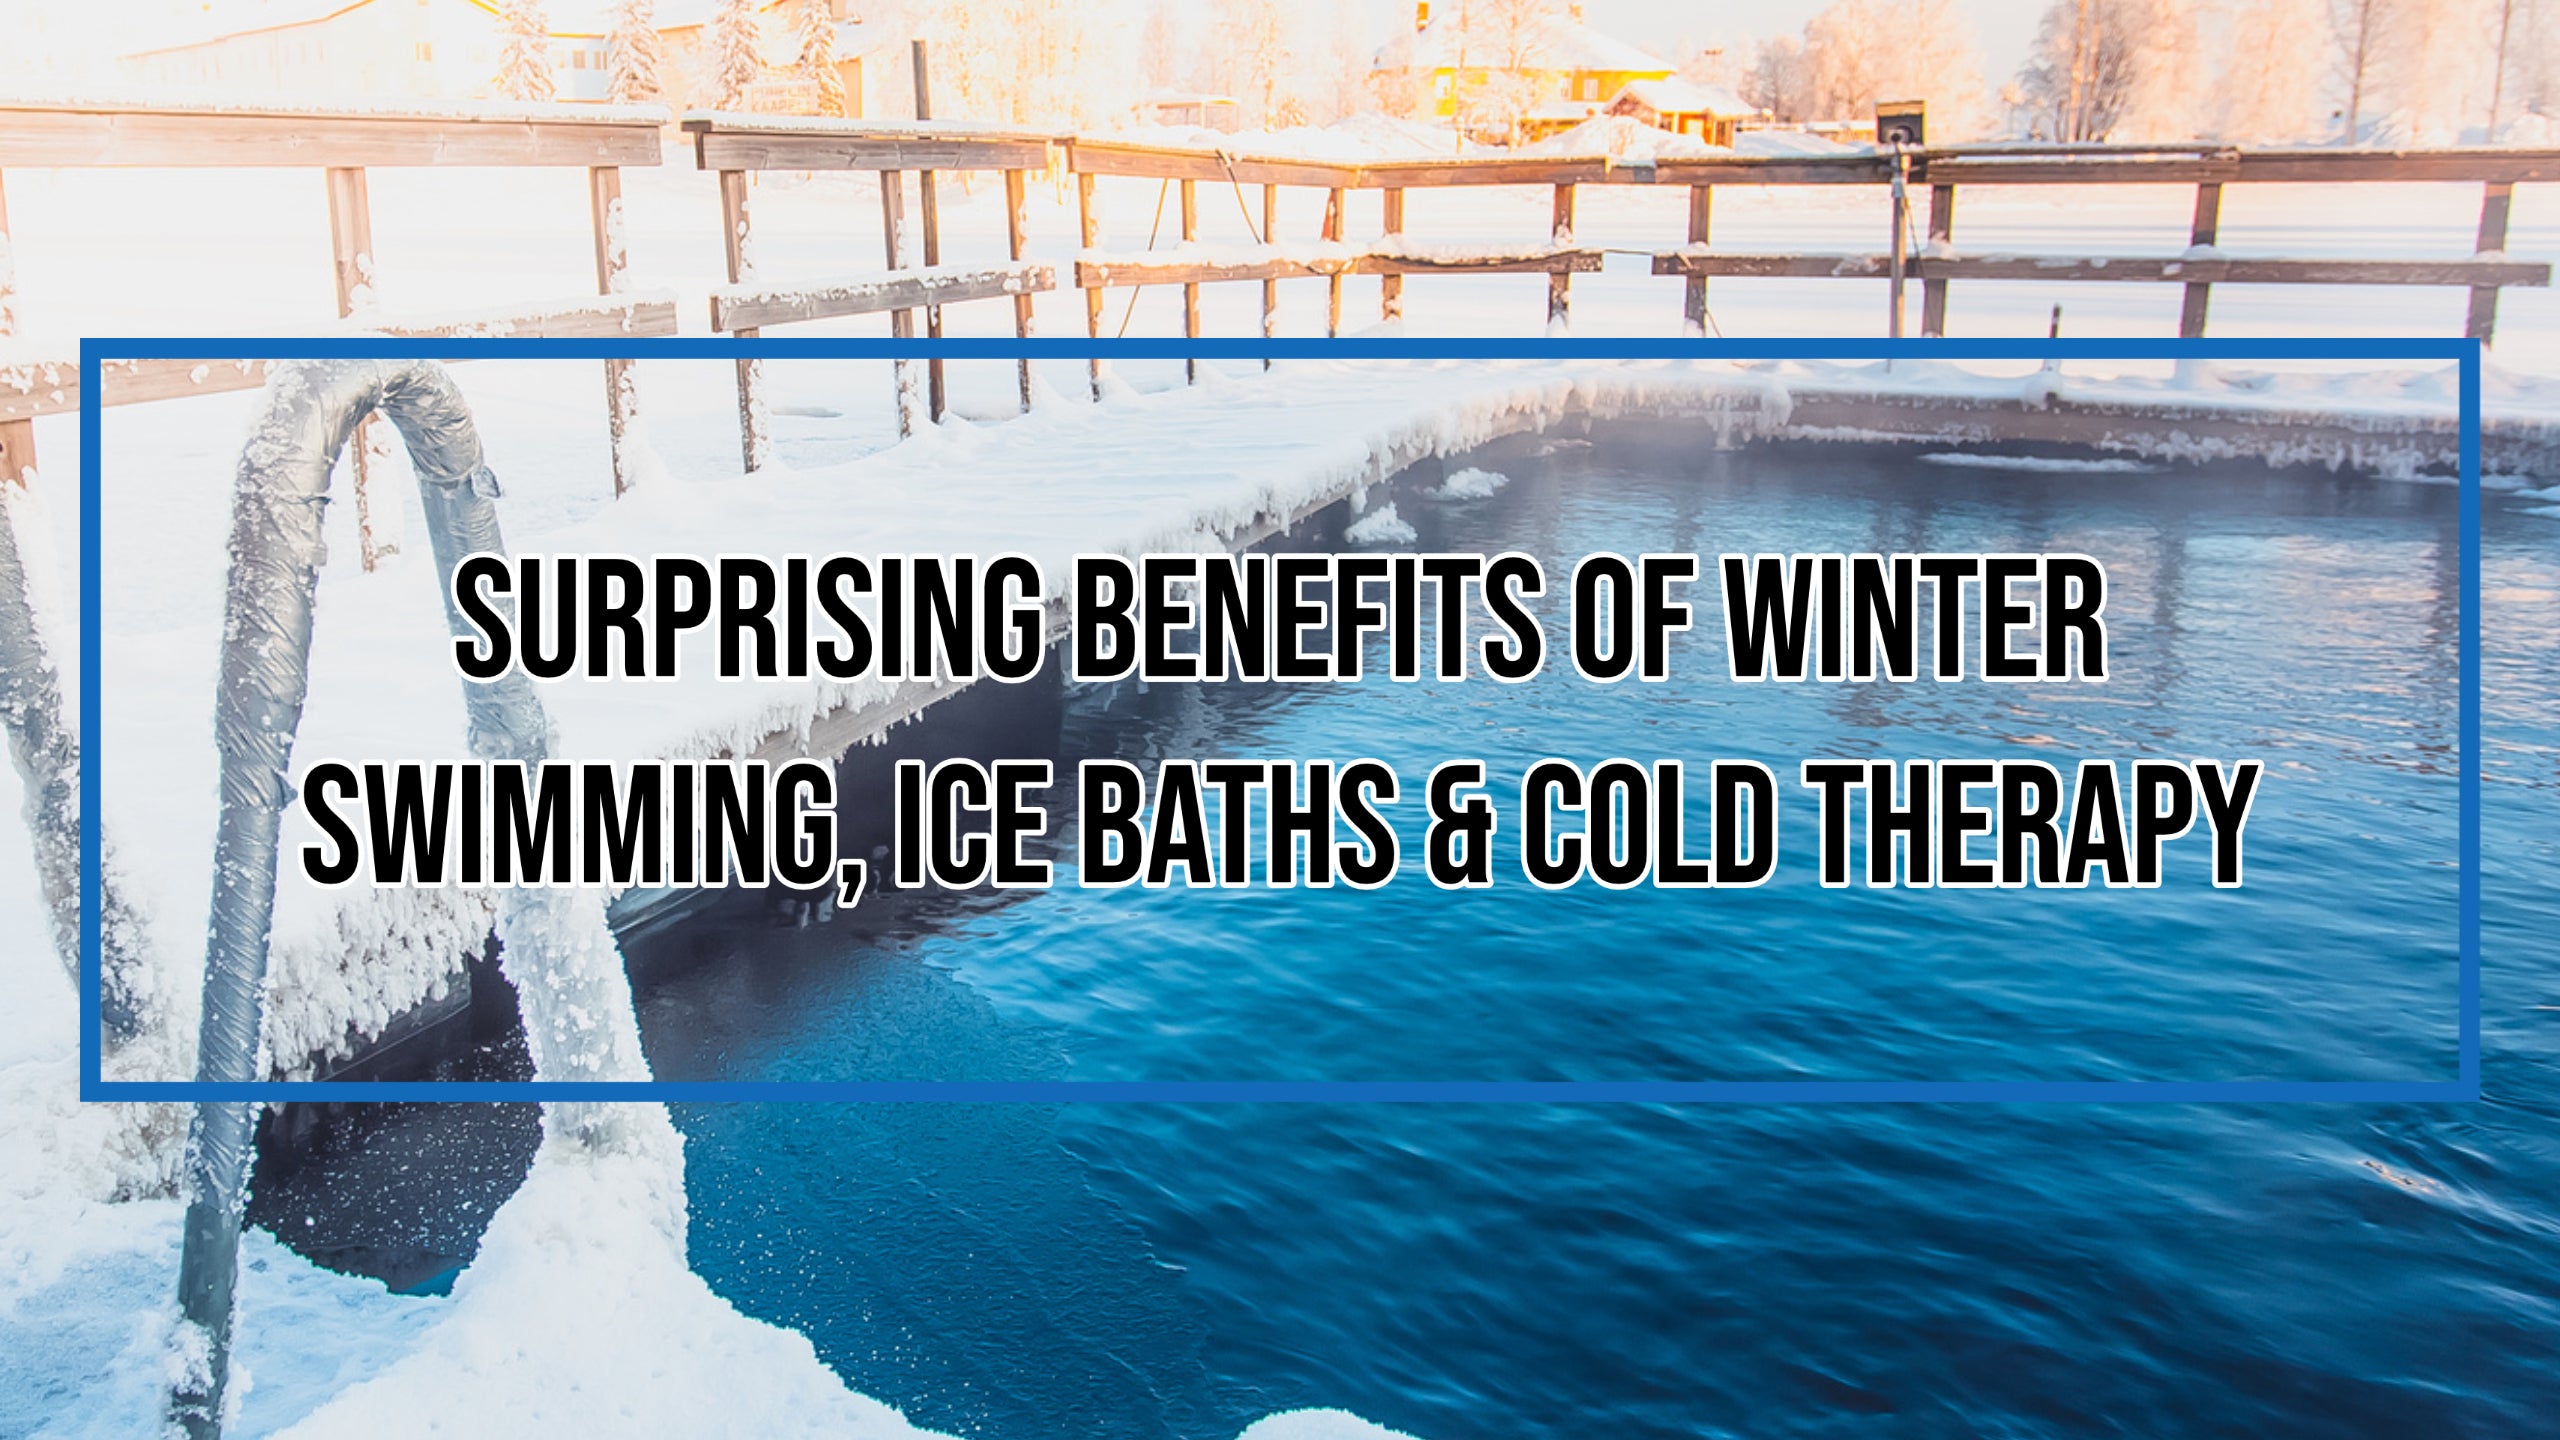 https://cdn.shopify.com/s/files/1/2099/8875/files/Surprising_Benefits_of_Winter_Swimming_Ice_Baths_Cold_Therapy.jpg?v=1675936830